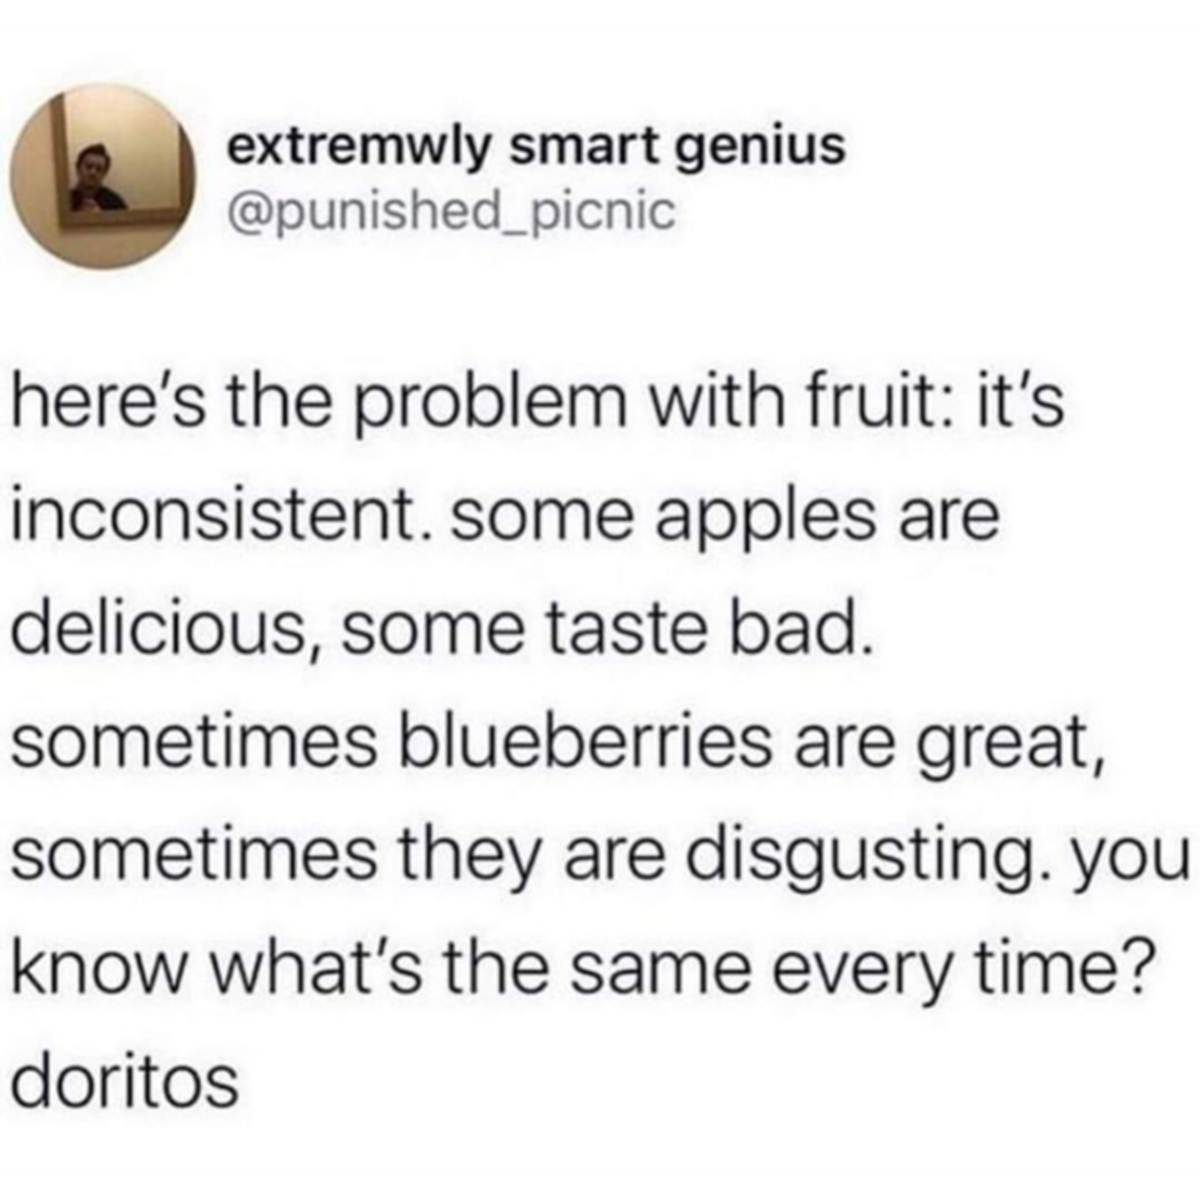 screenshot - extremwly smart genius here's the problem with fruit it's inconsistent. some apples are delicious, some taste bad. sometimes blueberries are great, sometimes they are disgusting. you know what's the same every time? doritos